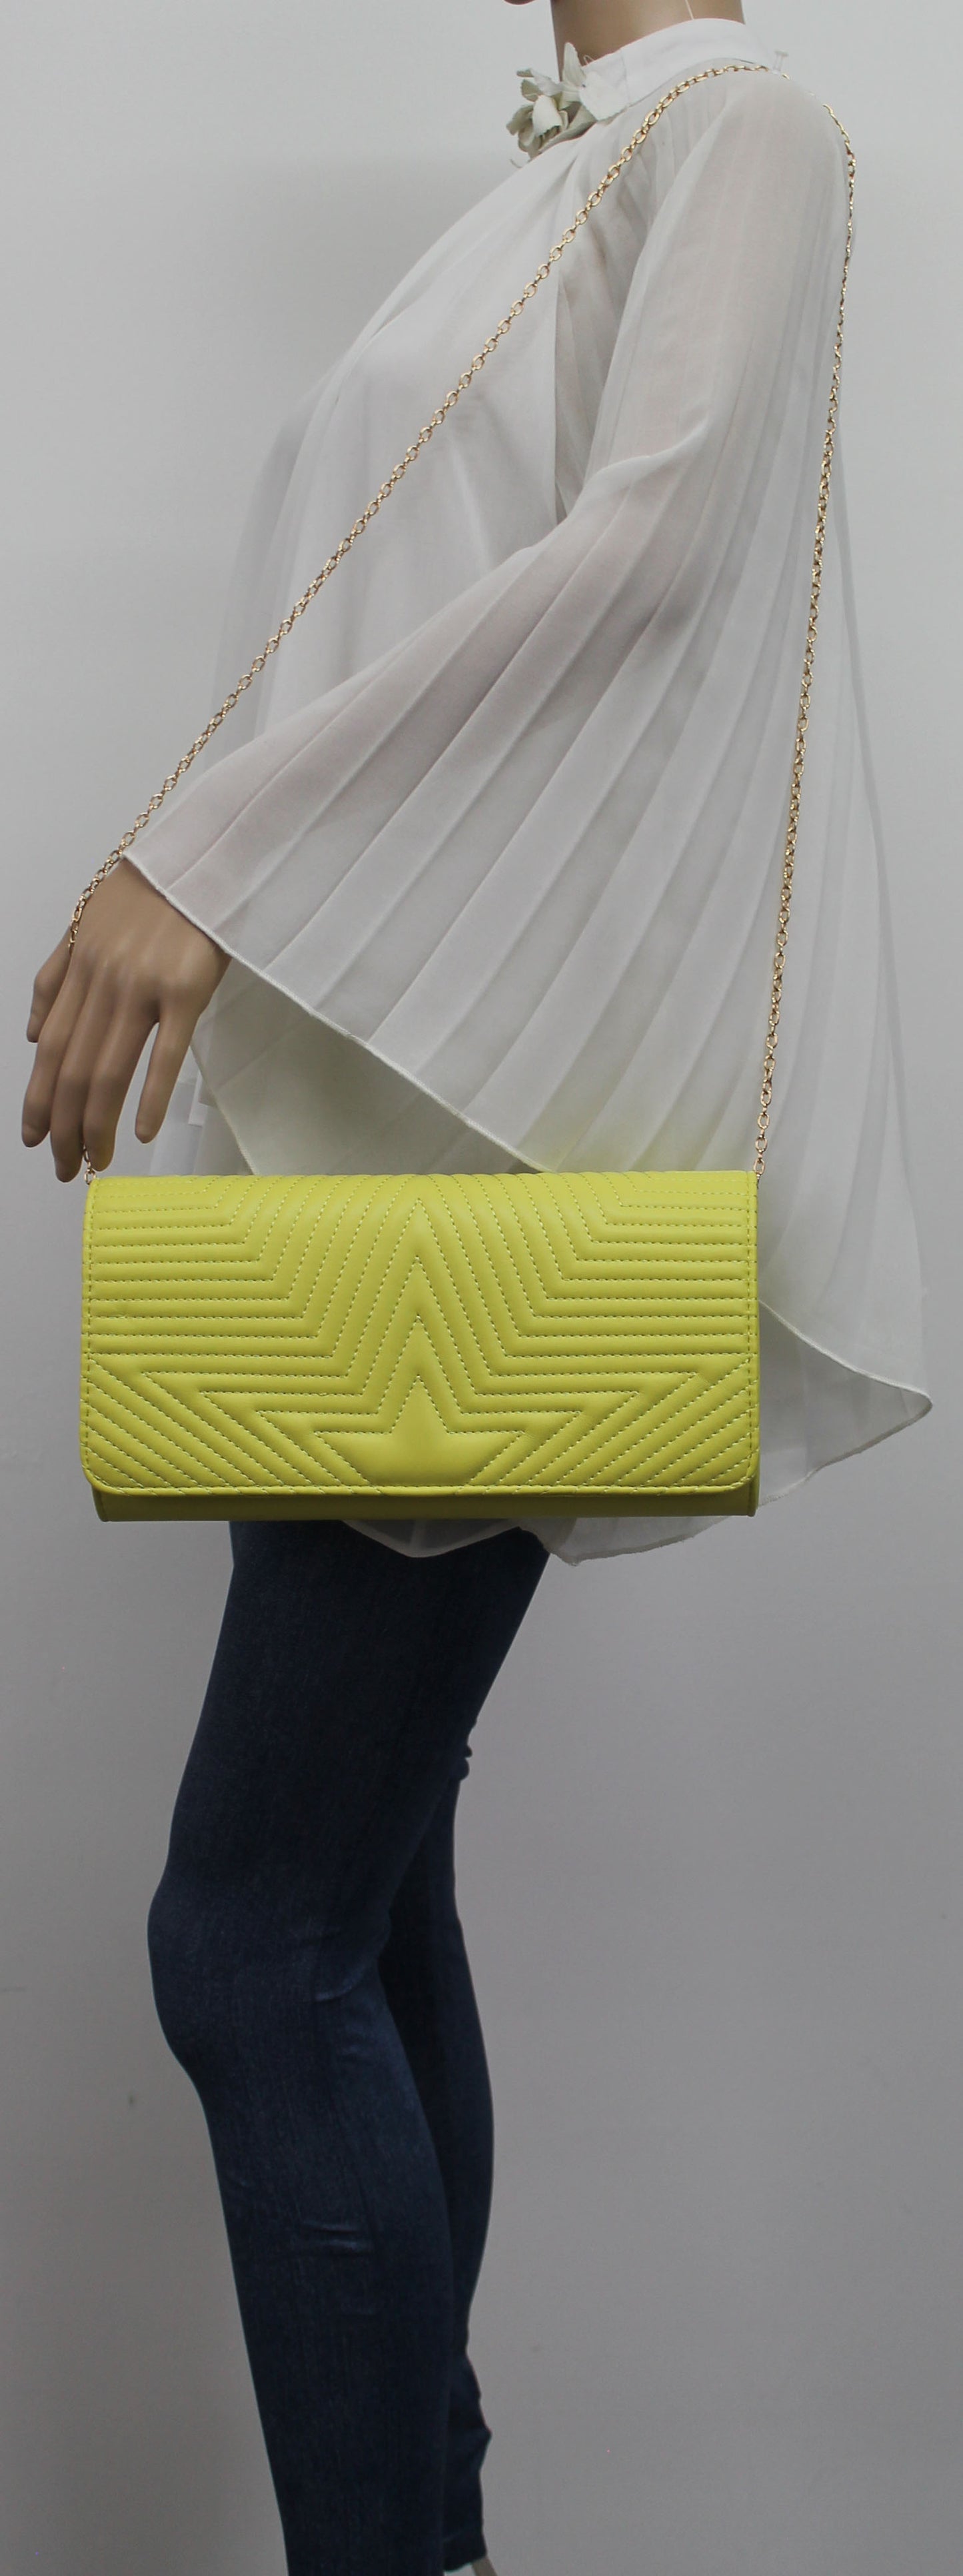 SWANKYSWANS Michelle Clutch Bag Yellow Cute Cheap Clutch Bag For Weddings School and Work